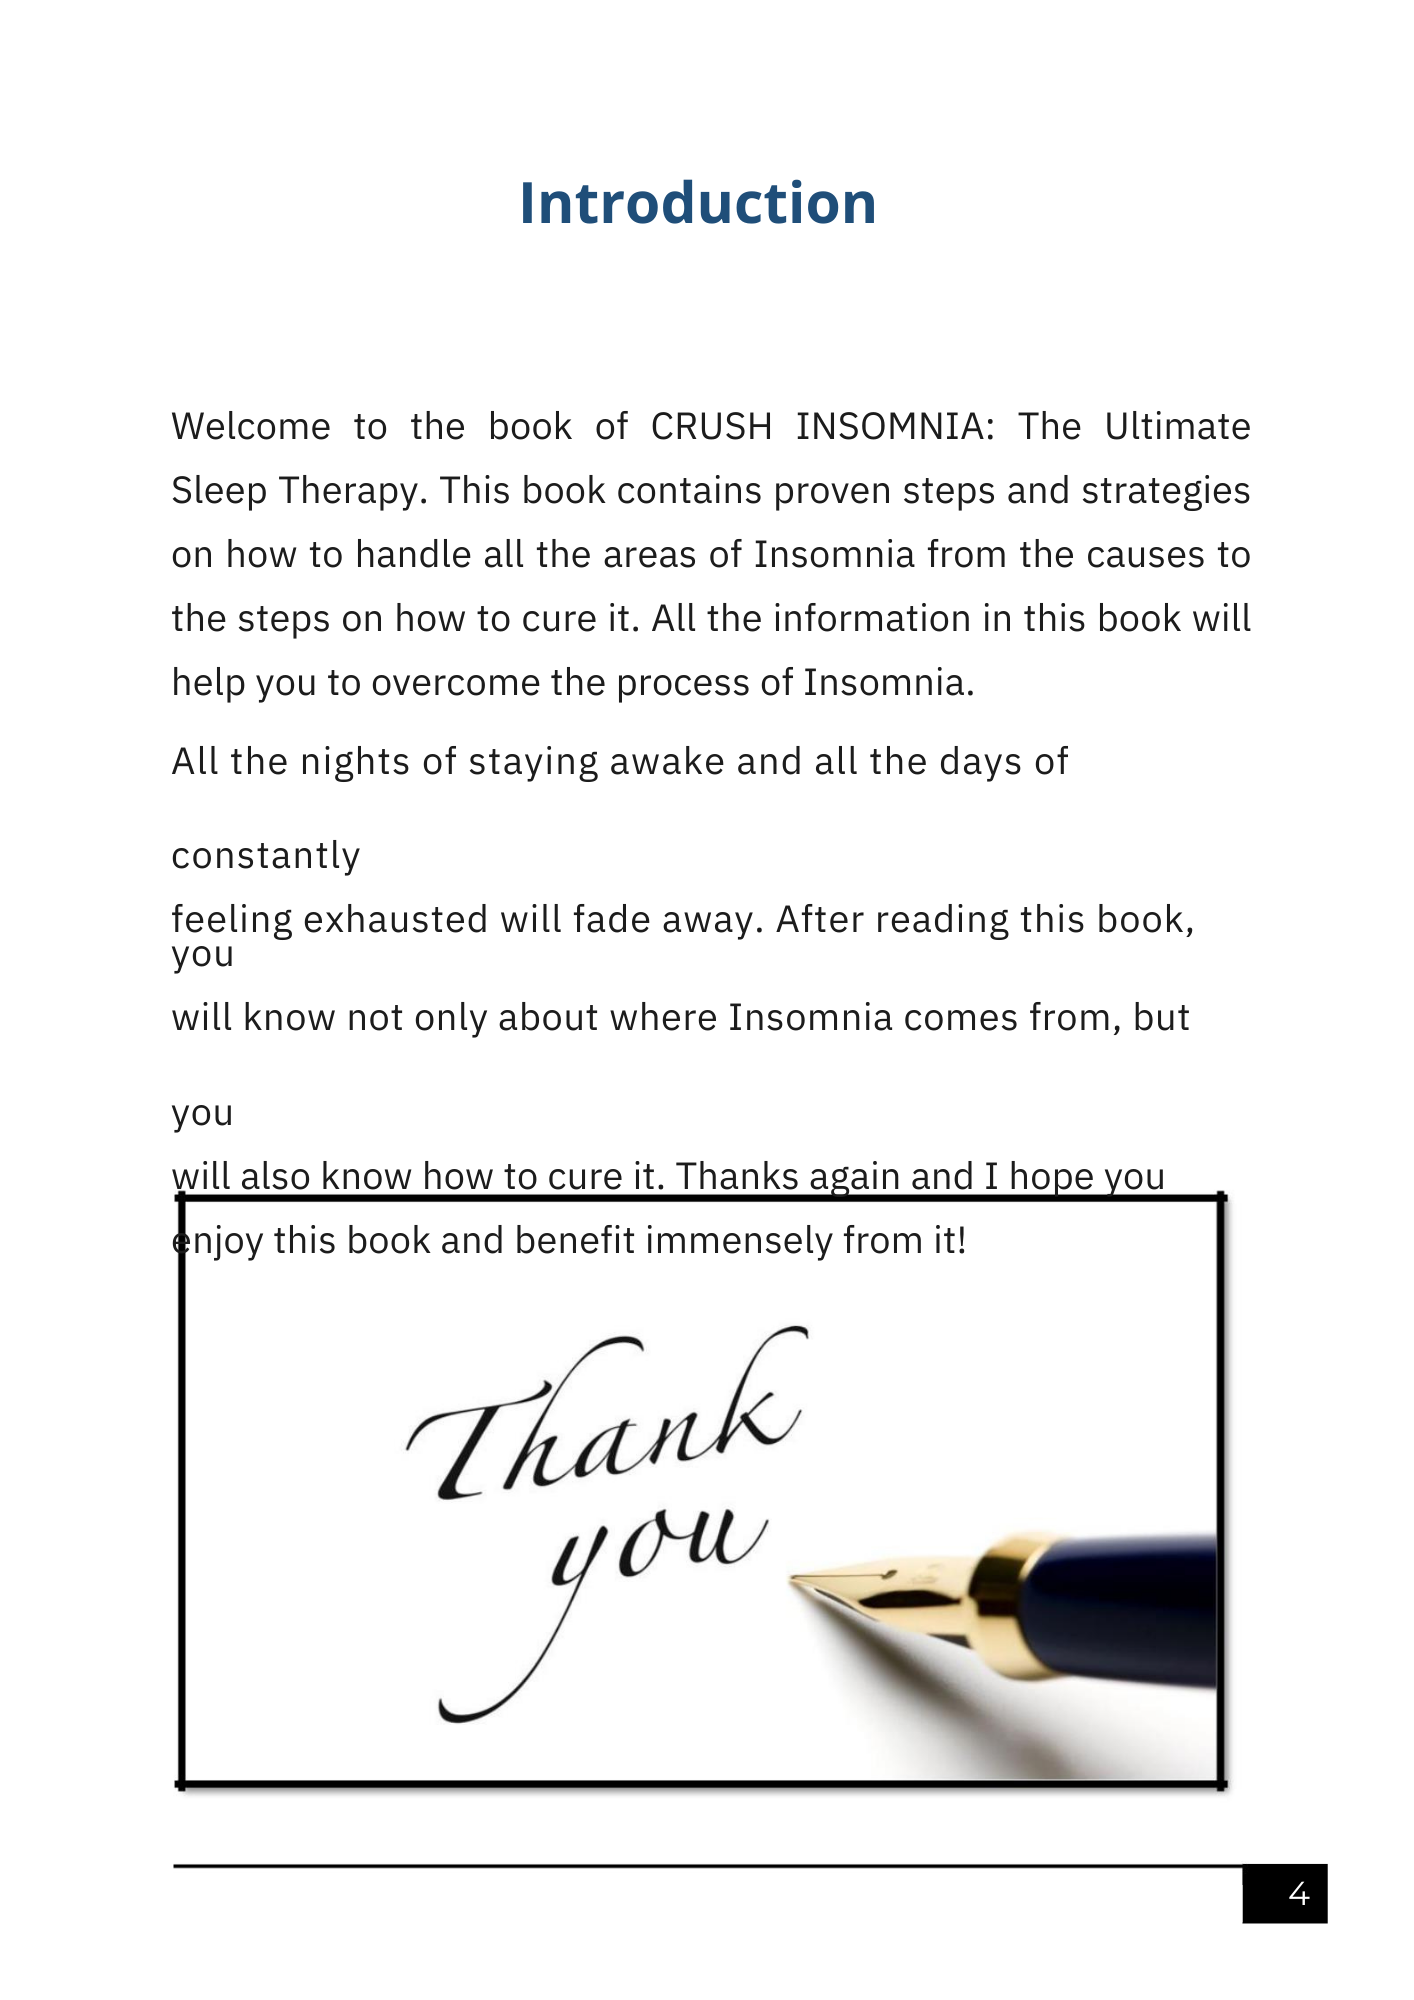 Crush Insomnia PDF Ebook The Ultimate Sleep Therapy - Download Delight